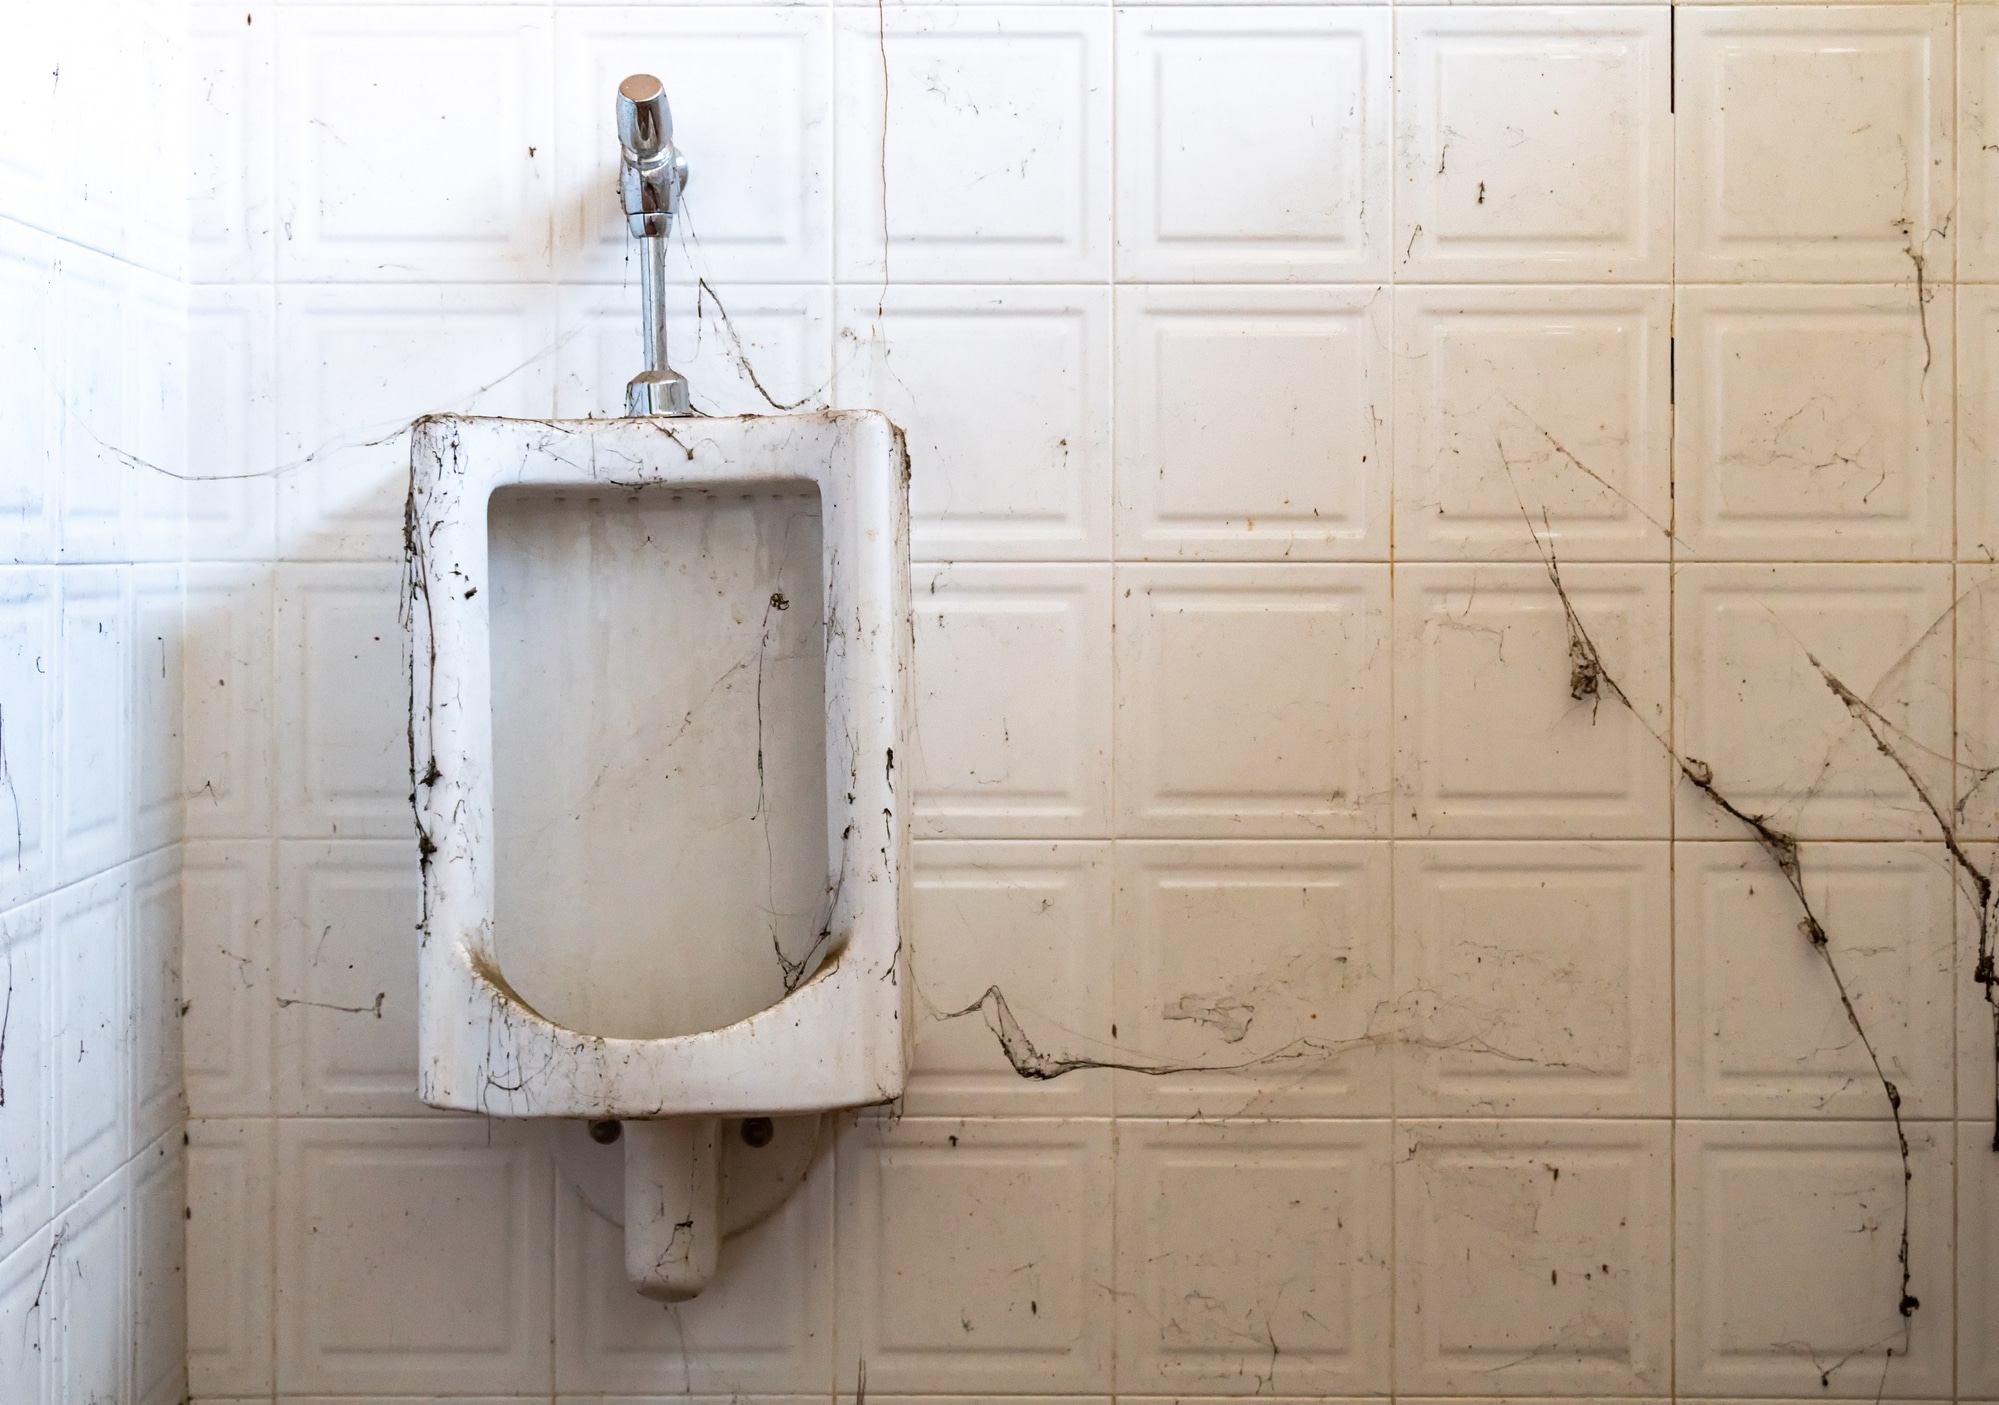 How to Know When It’s Time for a New Toilet